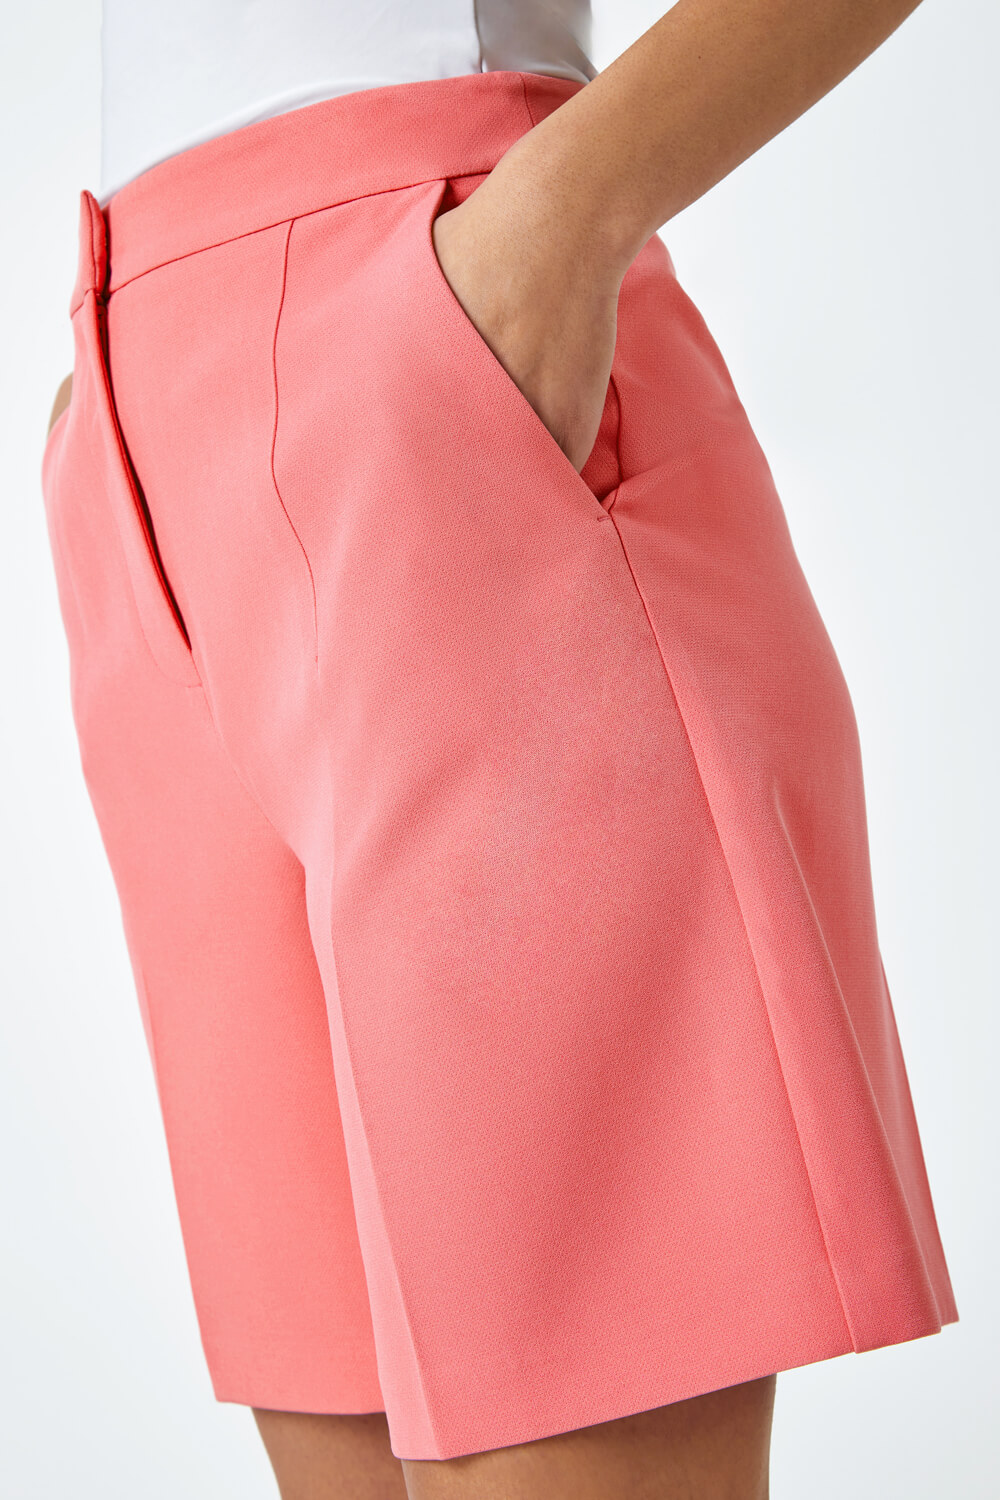 CORAL Tailored Bermuda Shorts, Image 5 of 5